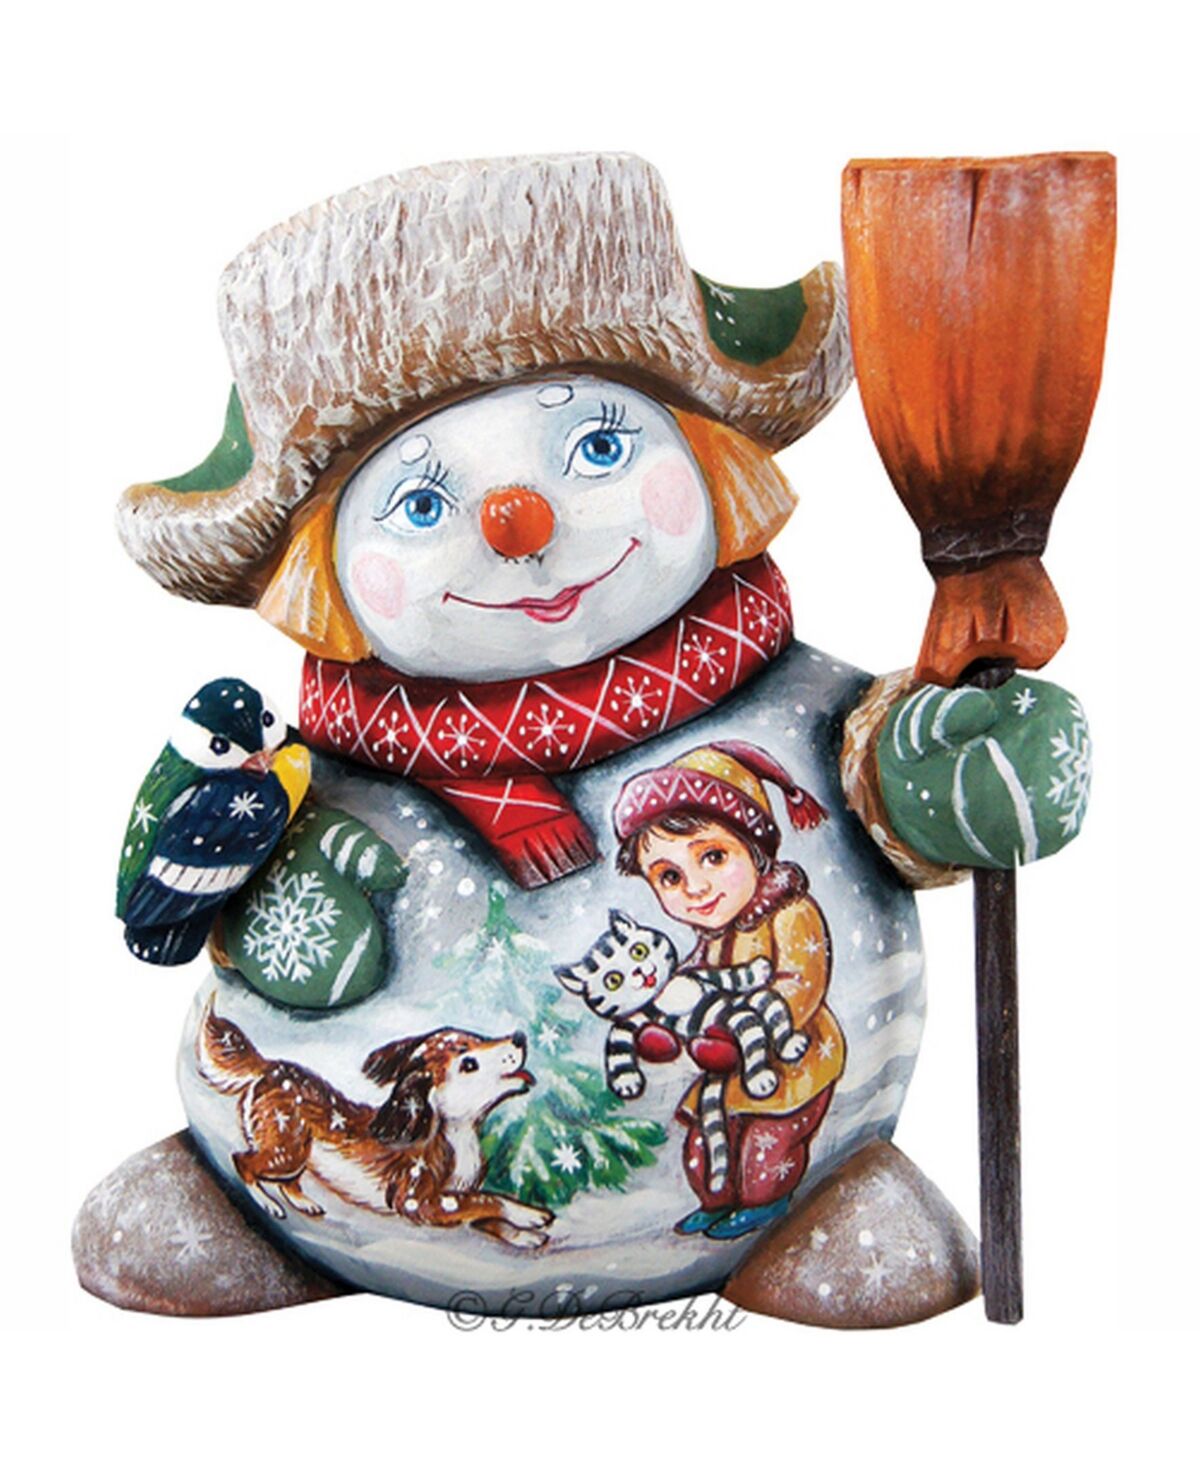 G.DeBrekht Woodcarved Hand Painted Friends Forever Figurine - Multi